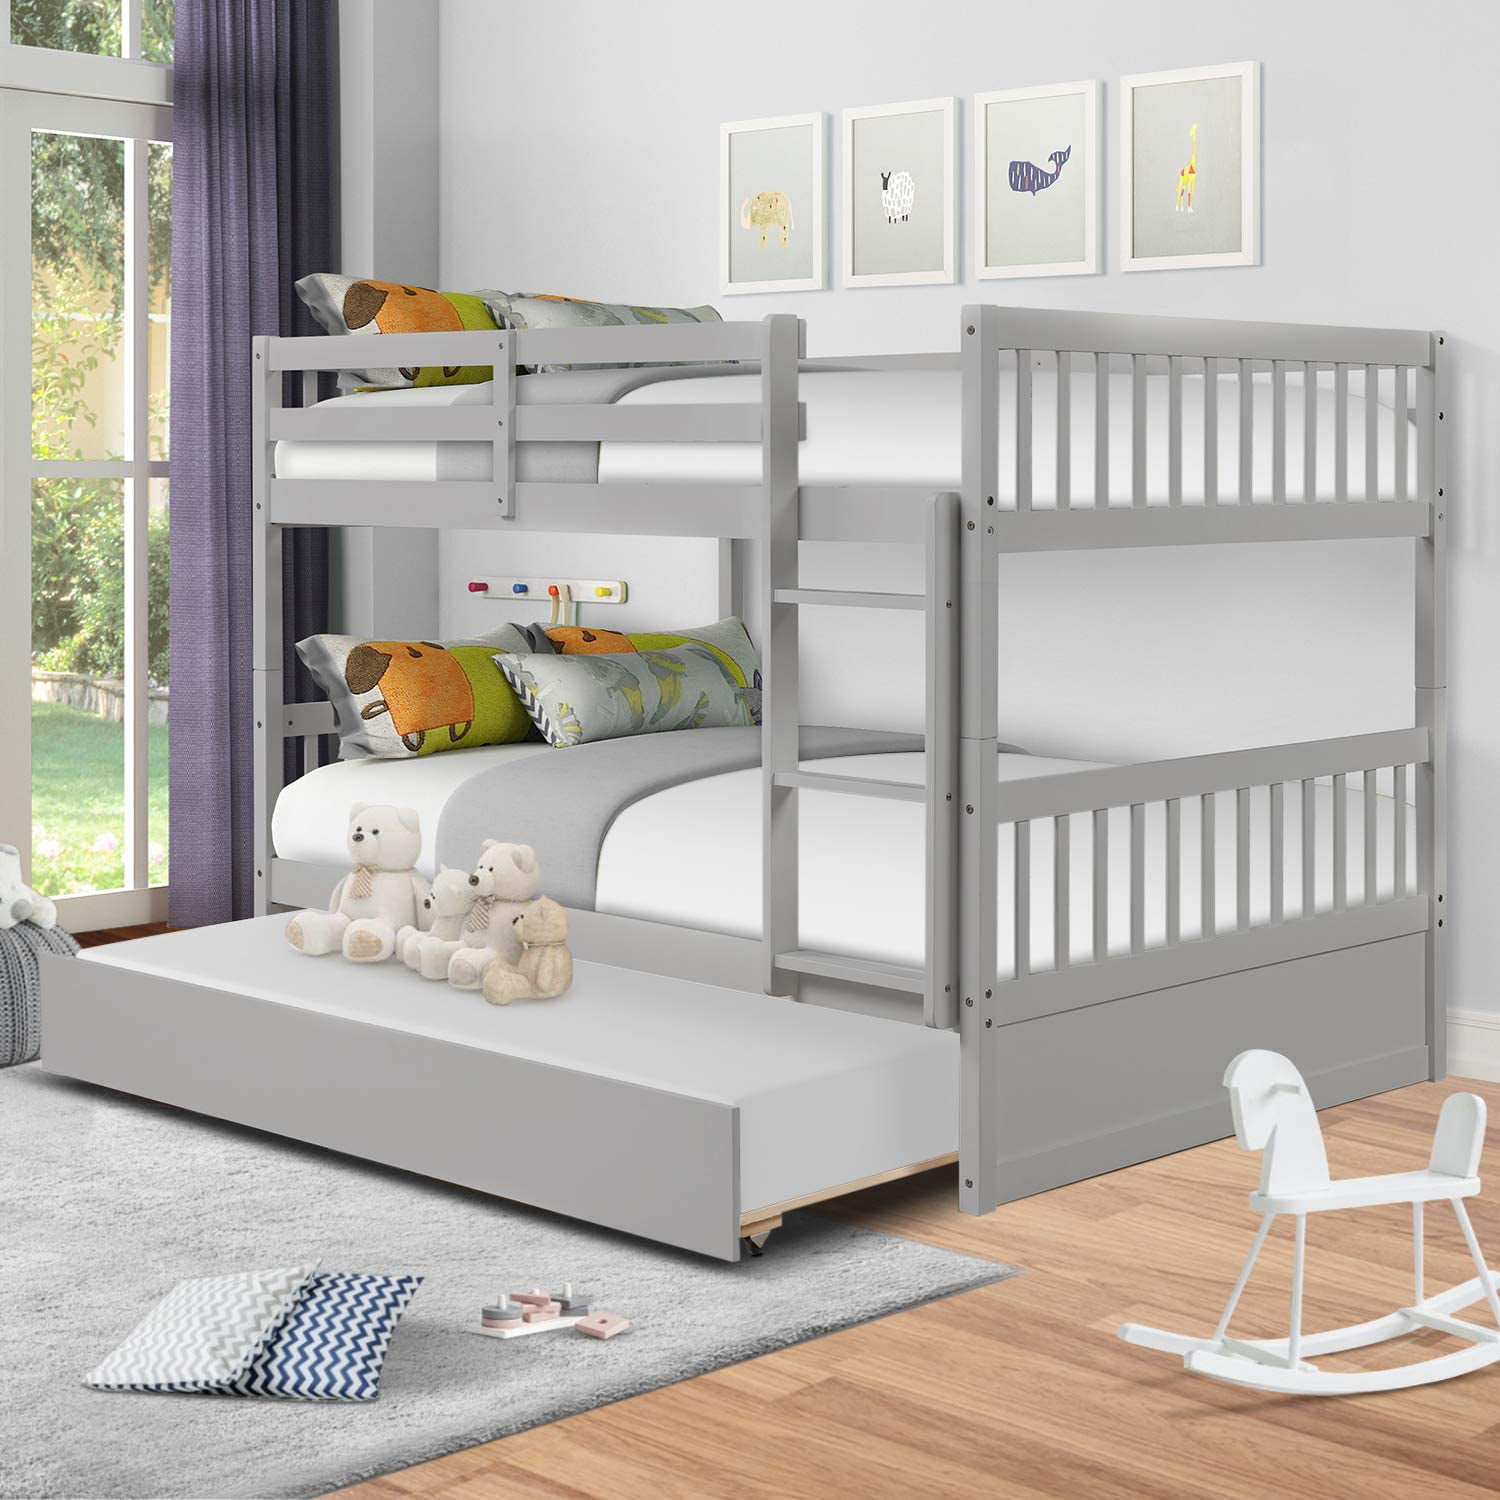 Bunk Bed With Trundle Convertible, Grey Bunk Bed With Trundle